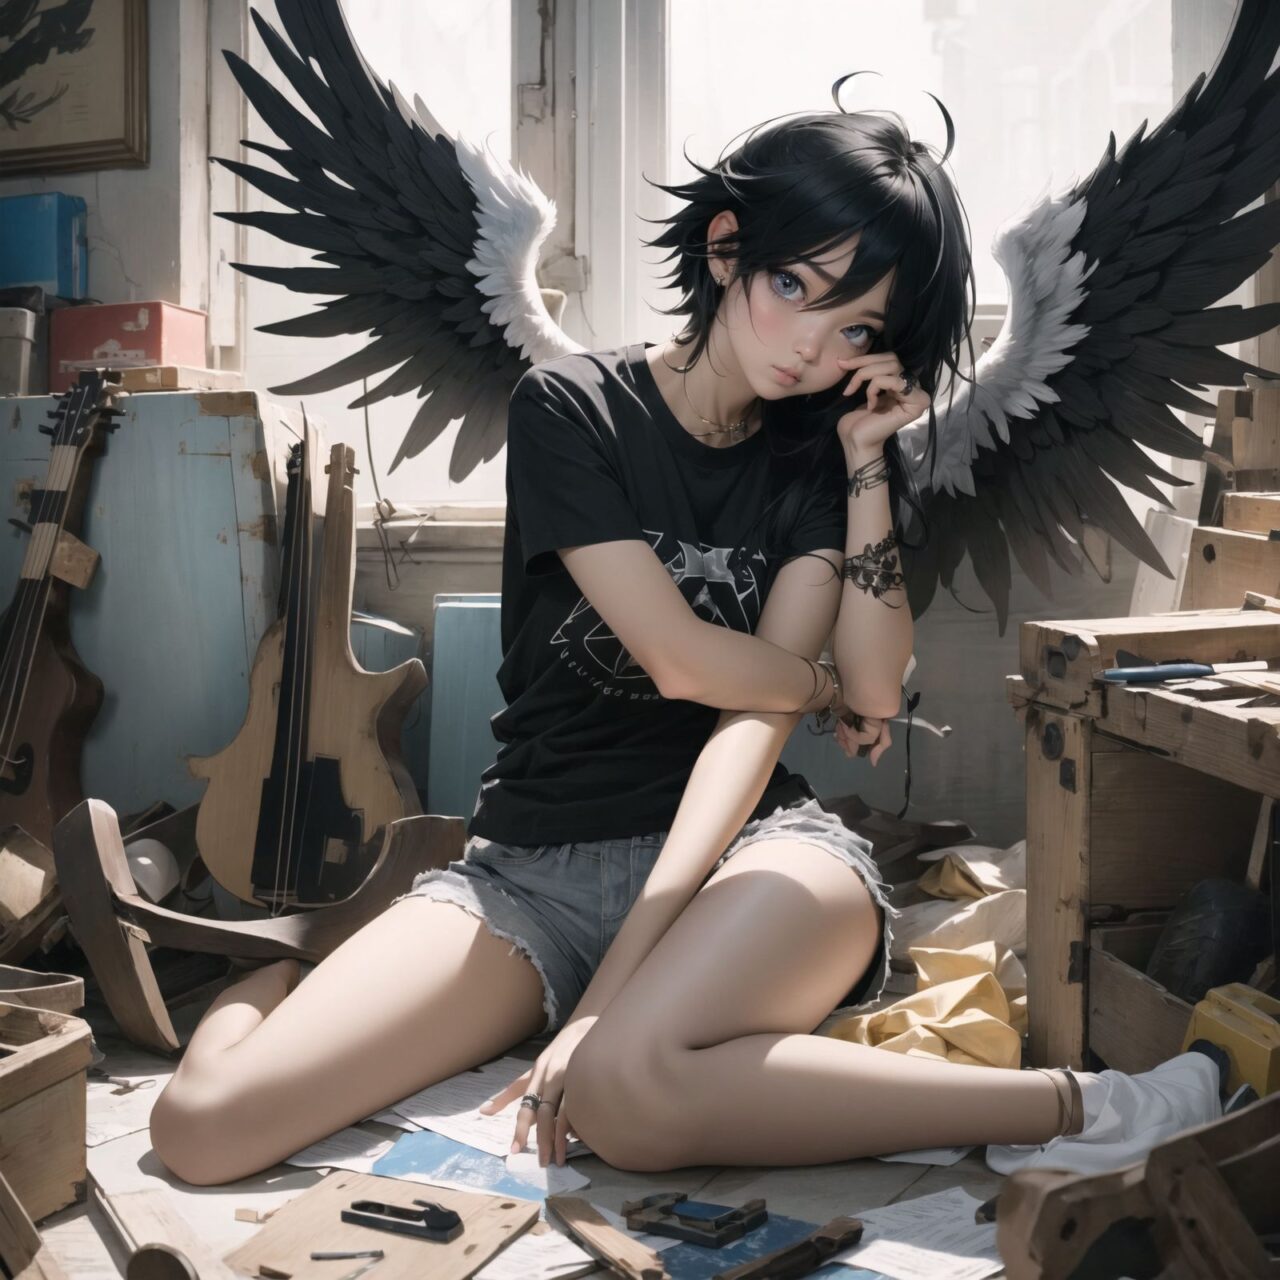 (Emo black angel: 1.5), angel rings and wings,
A girl is depicted in detail sitting in a cluttered room.
She is wearing a black T-shirt and shorts and has a lethargic expression on her face.
In the background are various notes and tools, as well as a bright yellow wall with a blue sky seen through the window, creating an ennui and chaotic atmosphere,